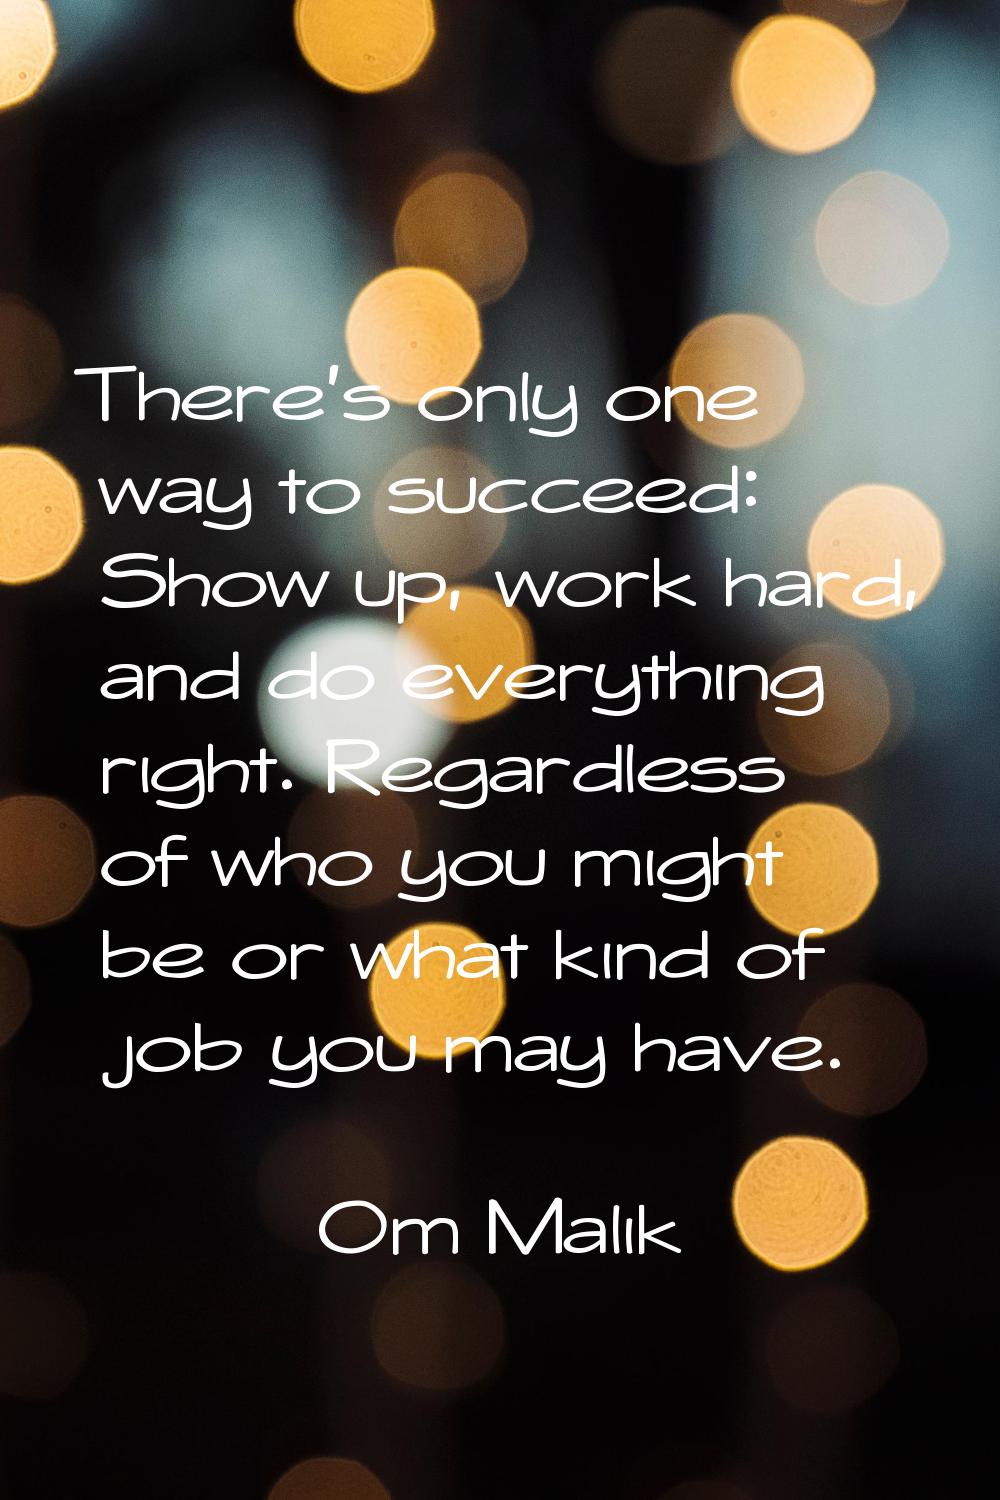 There's only one way to succeed: Show up, work hard, and do everything right. Regardless of who you